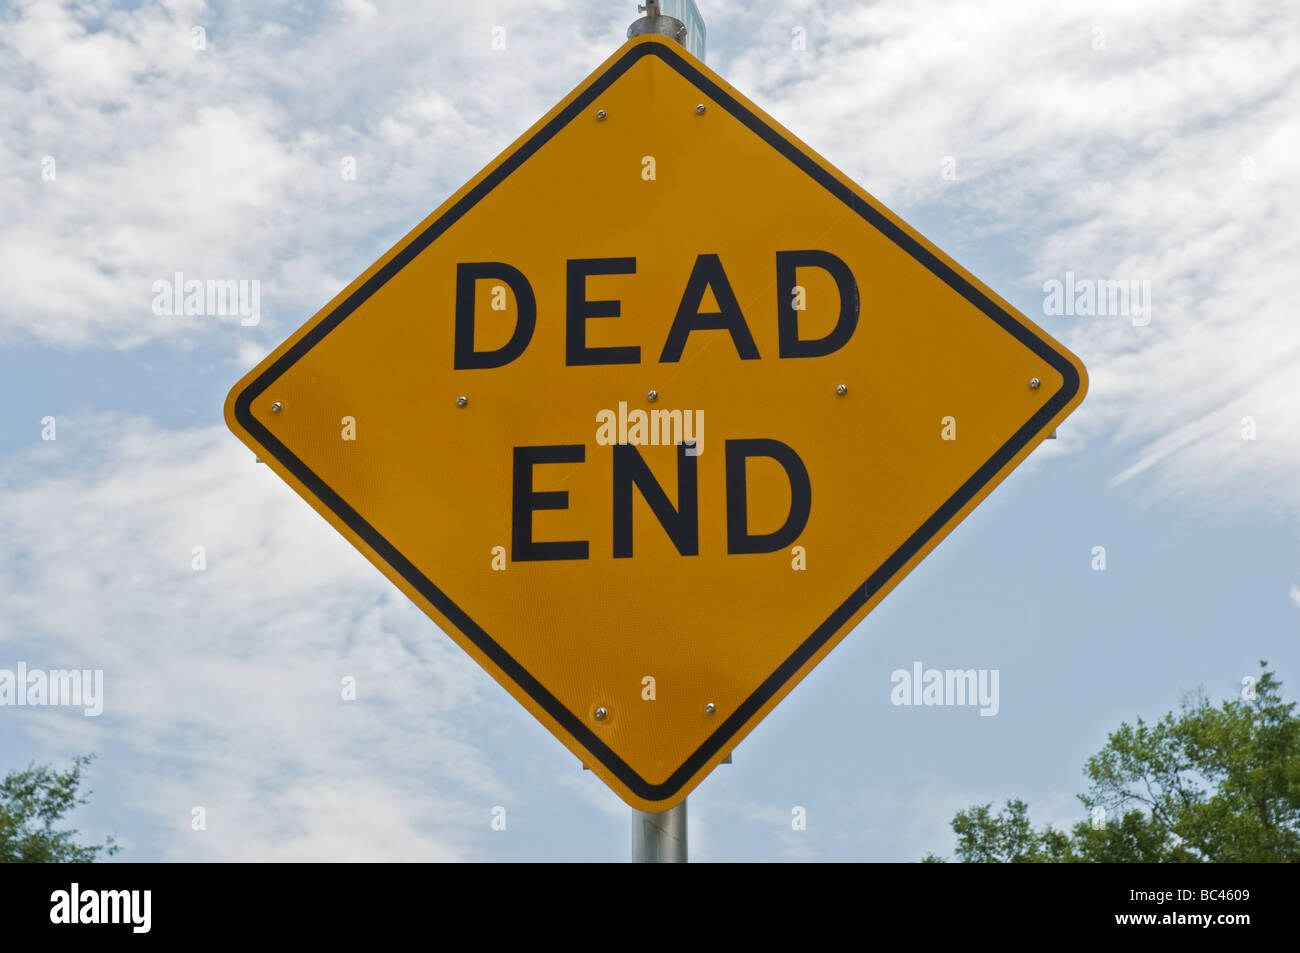 Dead end street warning sign, Florida. Stock Photo